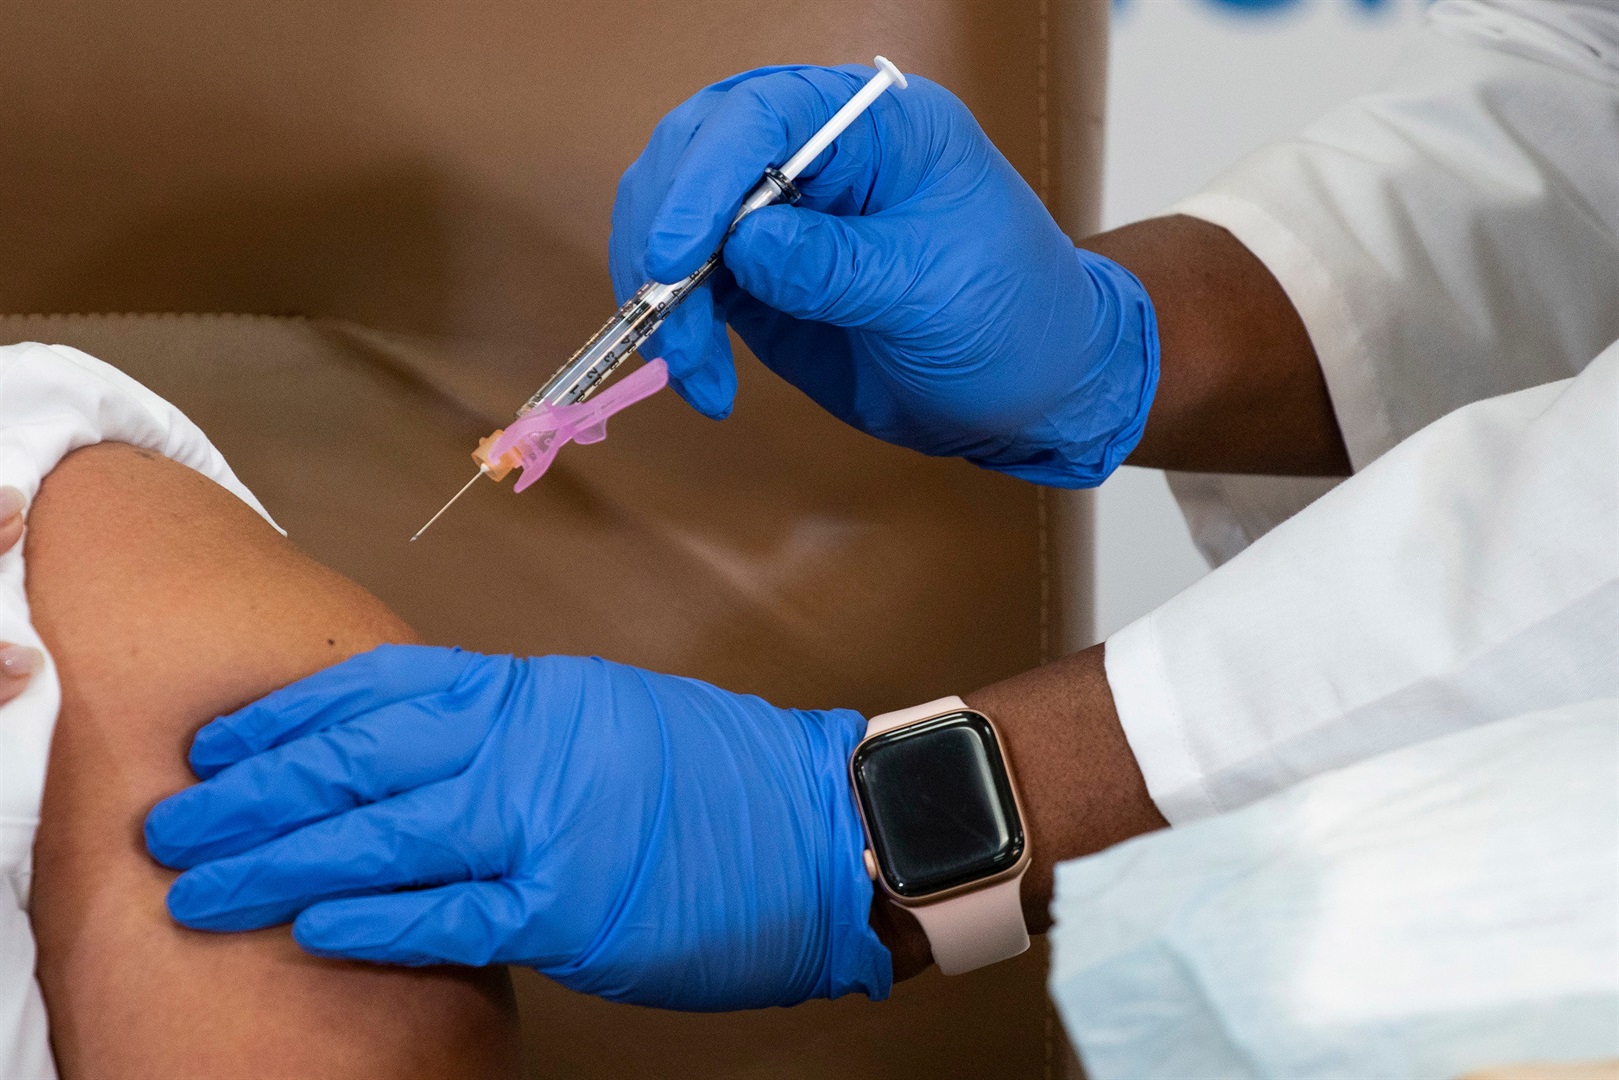 A nurse receives the Moderna Covid-19 vaccine at Northwell Health's Long Island Jewish Valley Stream Hospital on 21 December 2020 in Valley Stream, New York.